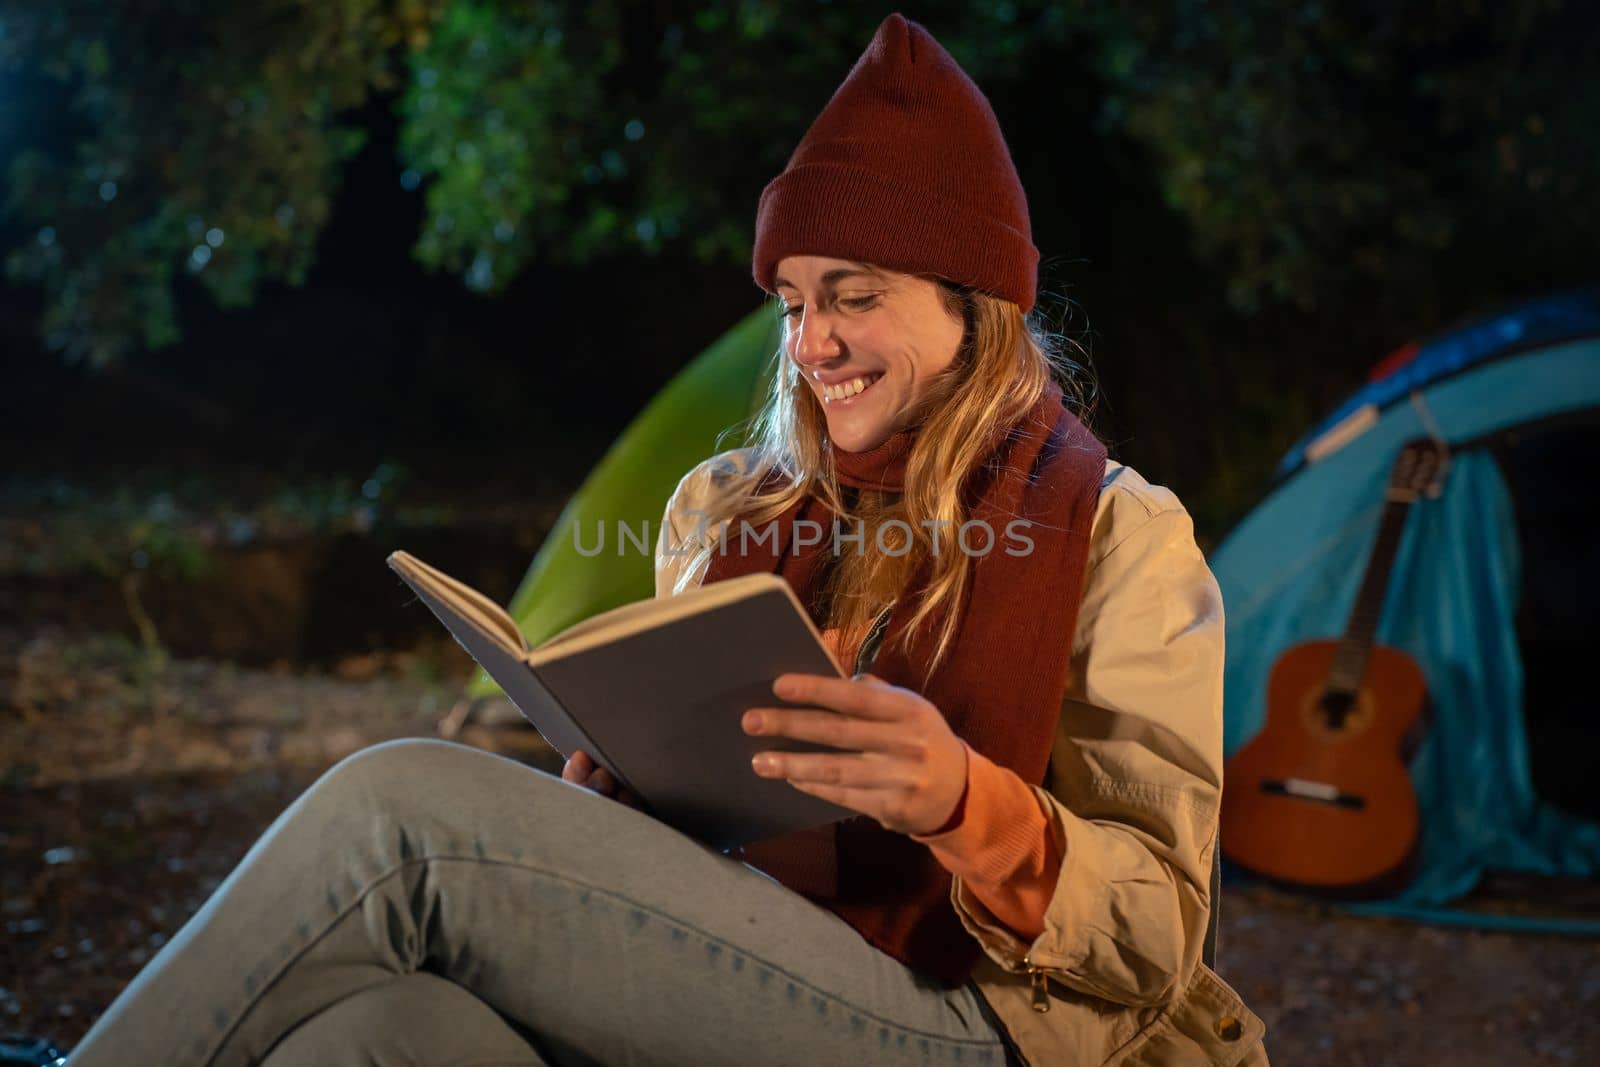 Girl reading a book at night camping. Night scene next to camping fire. Relaxing in quiet nature. High quality photo